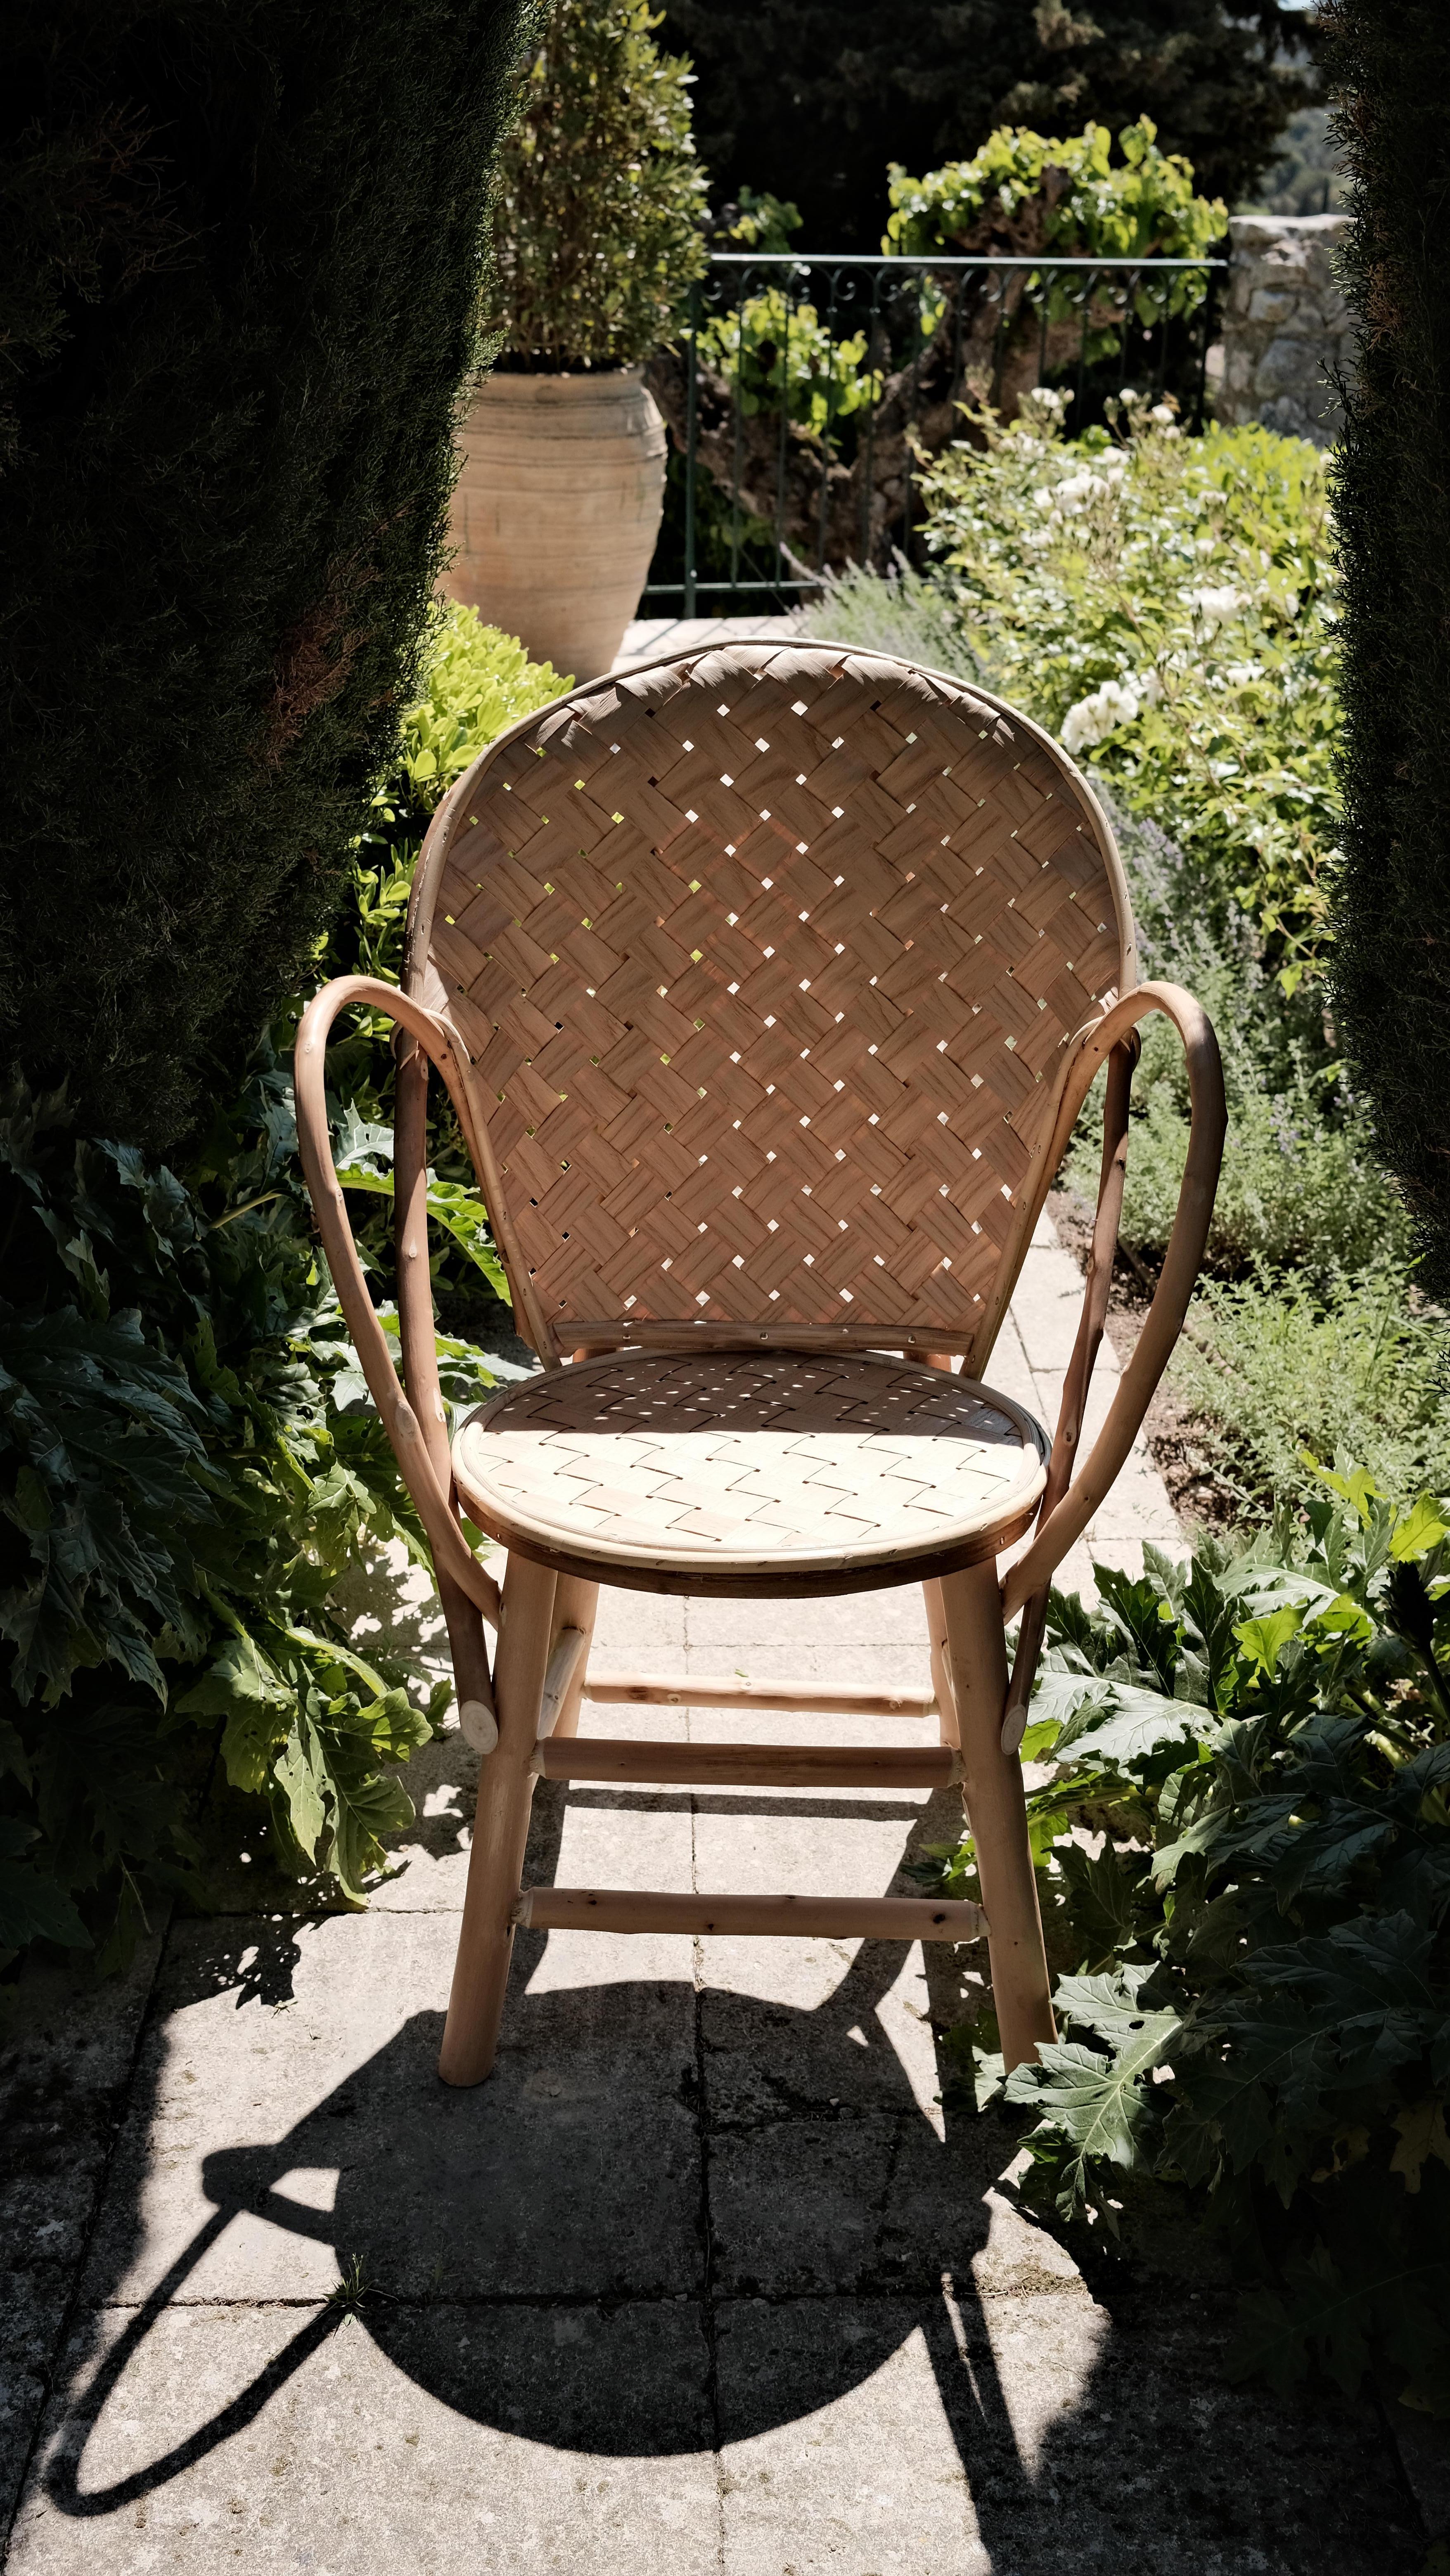 Le Fauteuil Classique Chair by Bosc Design
Dimensions: W 70 x D 42 x H 94 cm 
Materials: Wood.

The elegant and curved structure is covered with a magnificent braiding of chestnut sides on the seat and back. Handcrafted in France, each armchair is